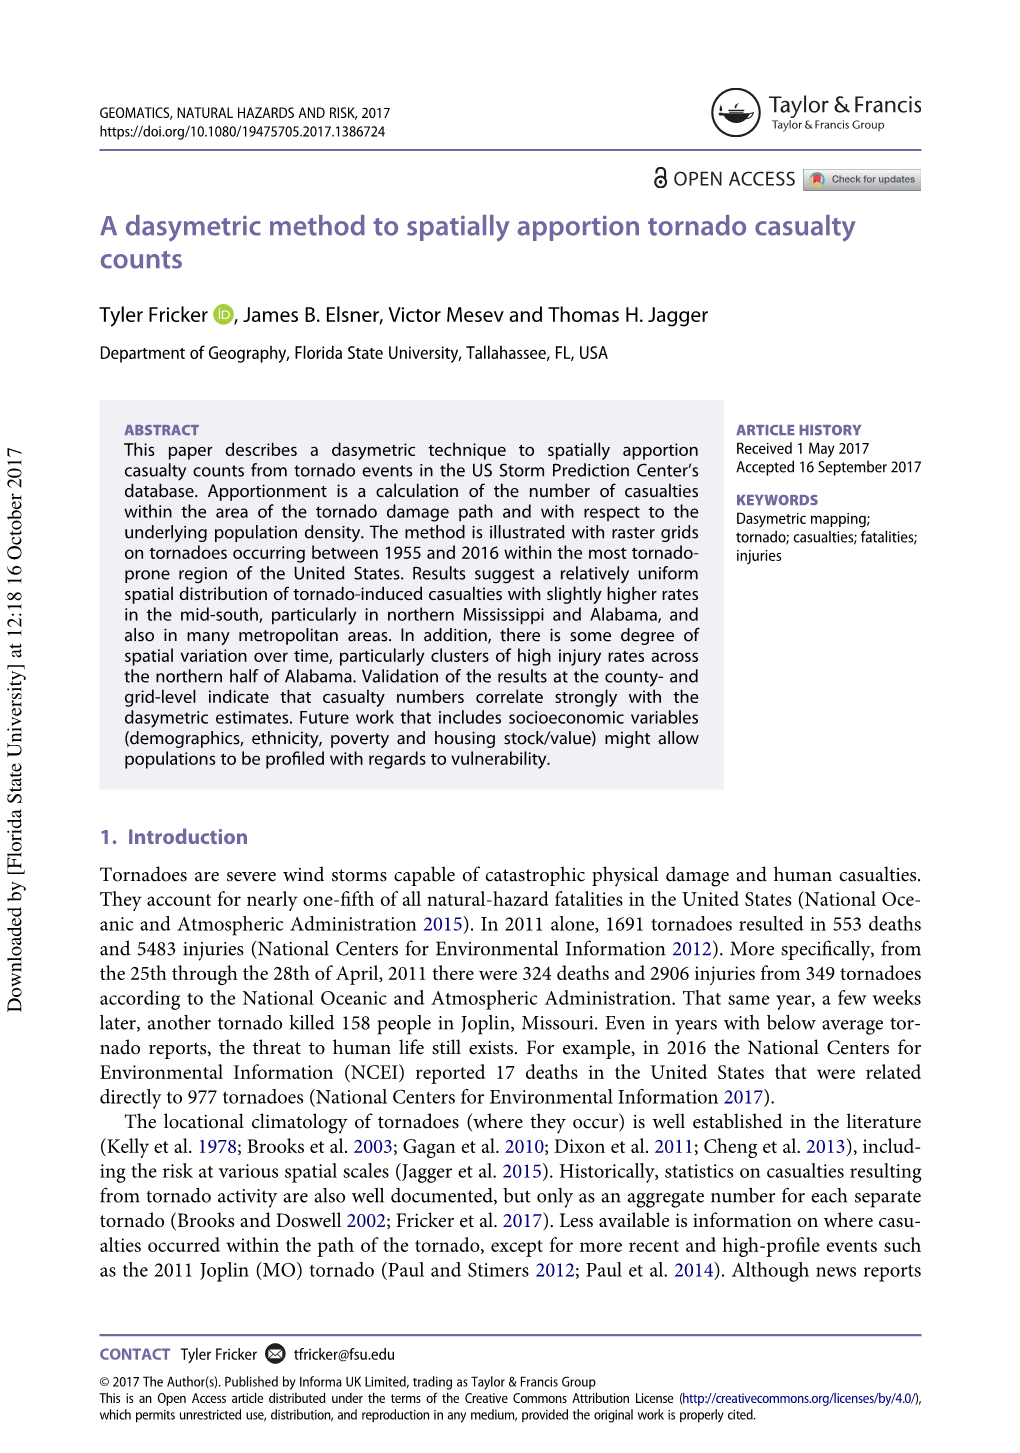 A Dasymetric Method to Spatially Apportion Tornado Casualty Counts